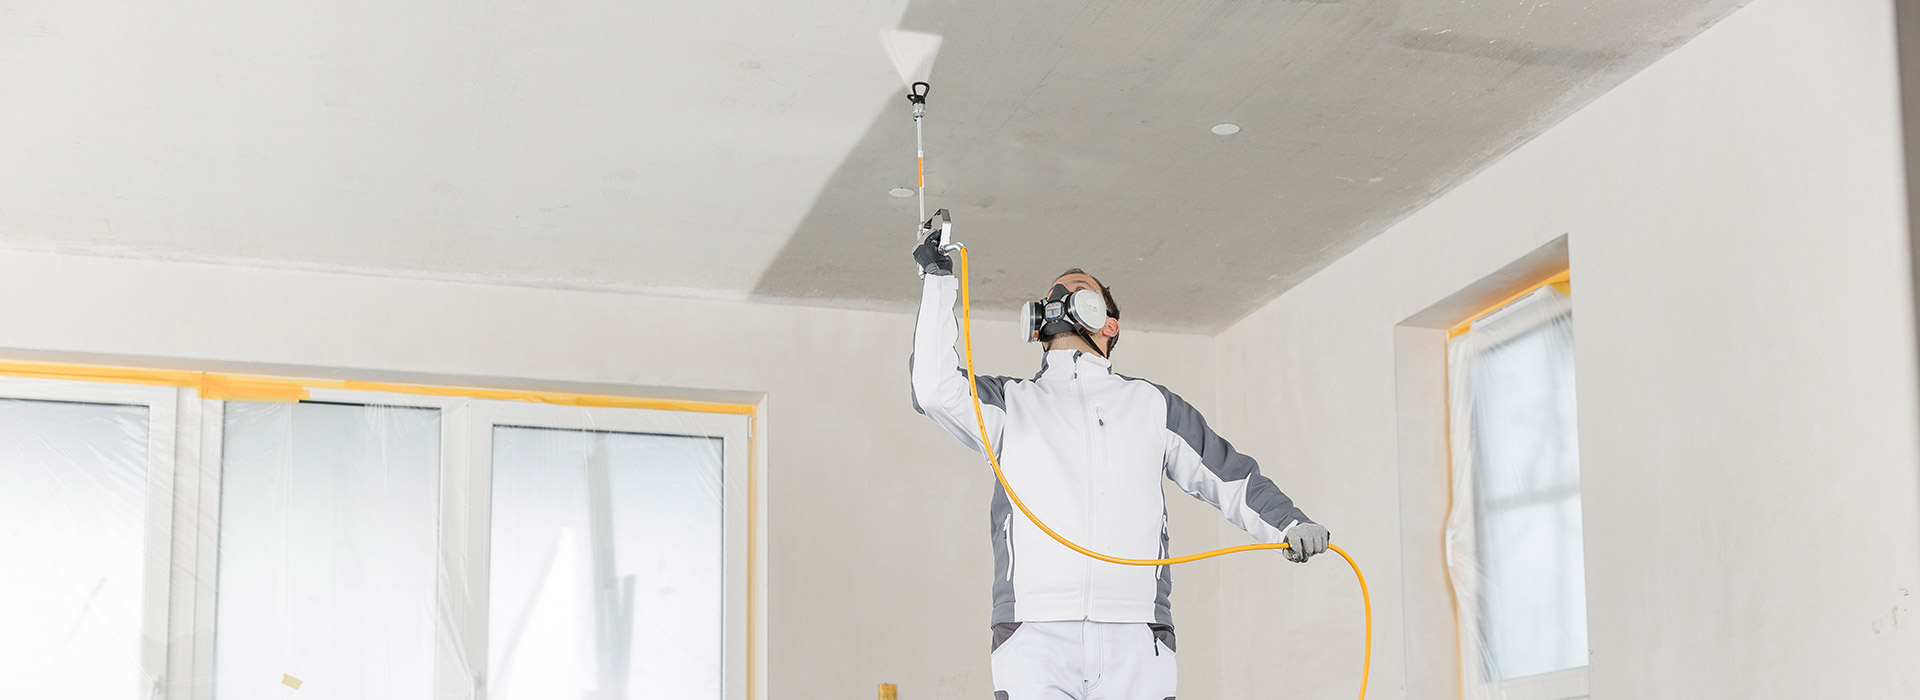 Can You Paint Ceilings With a Wagner Paint Sprayer  